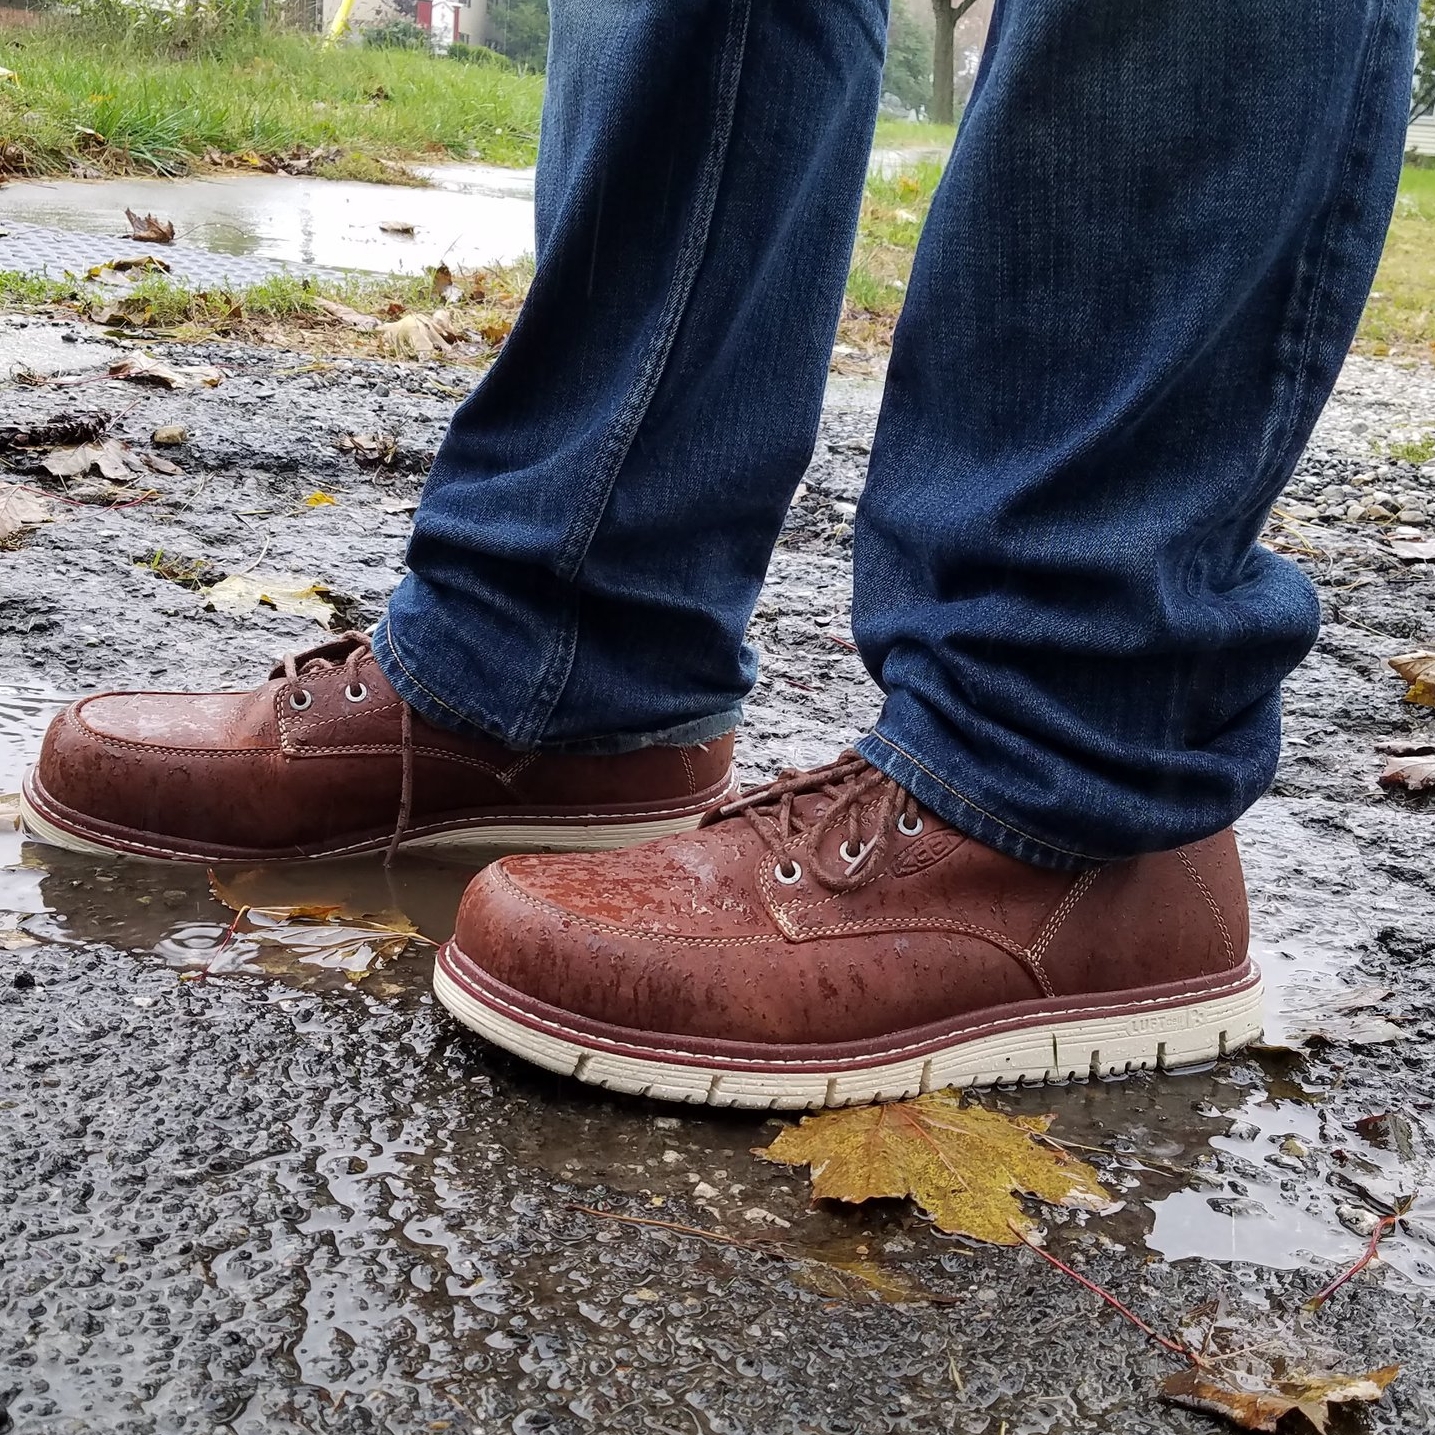 KEEN Utility Releases 2 New Styles of Work Boots That Keep You Looking and Feeling Good